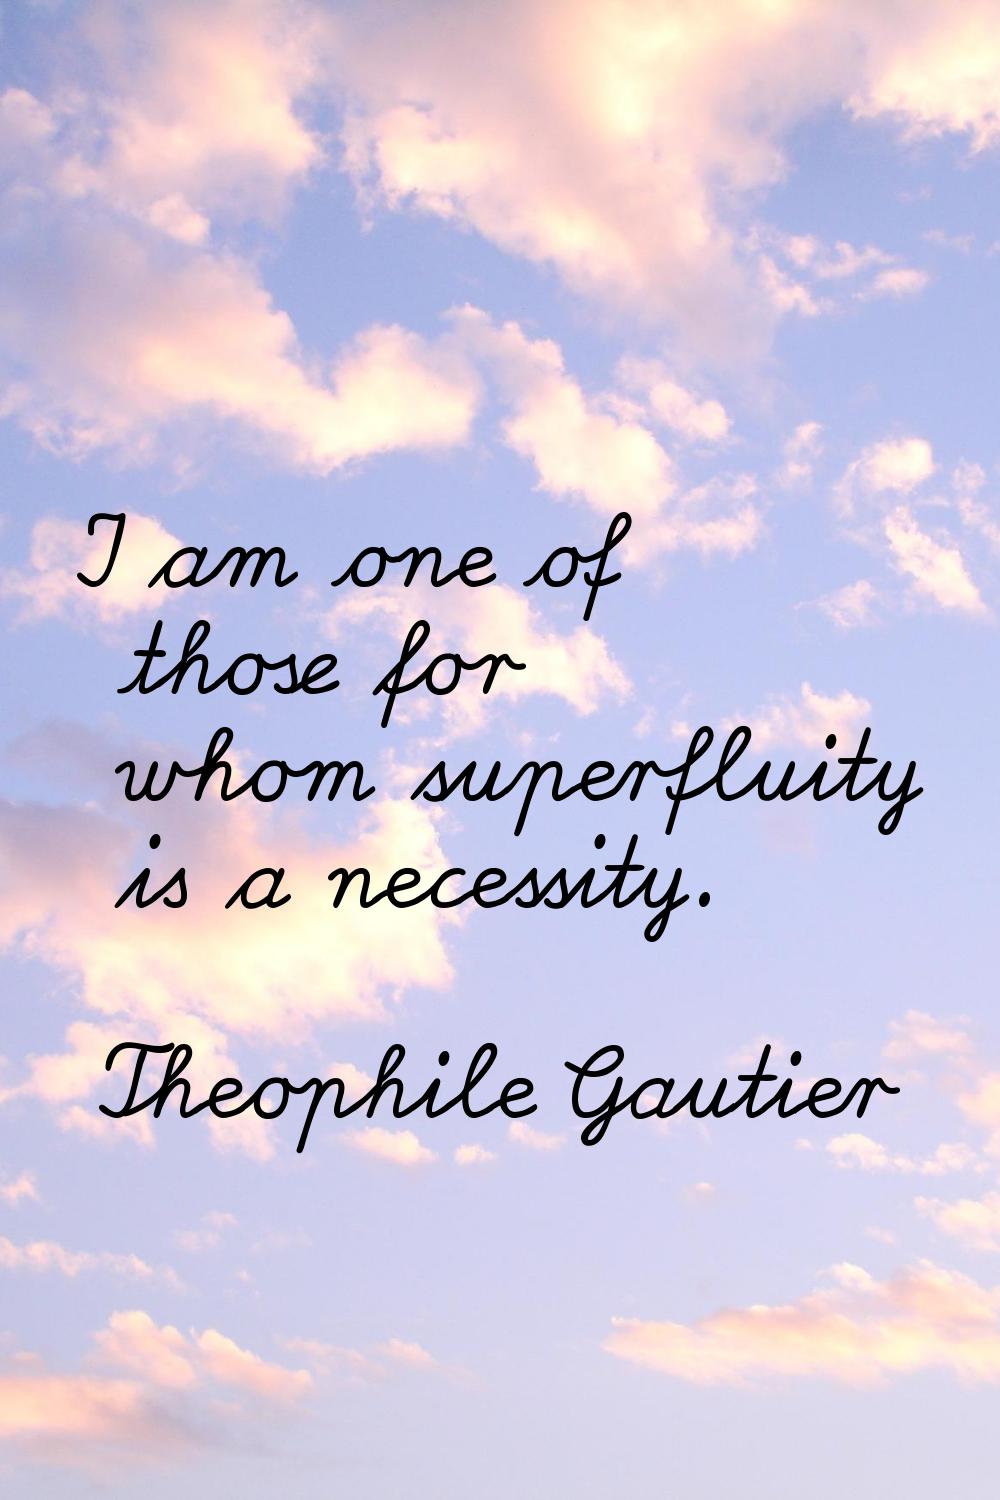 I am one of those for whom superfluity is a necessity.